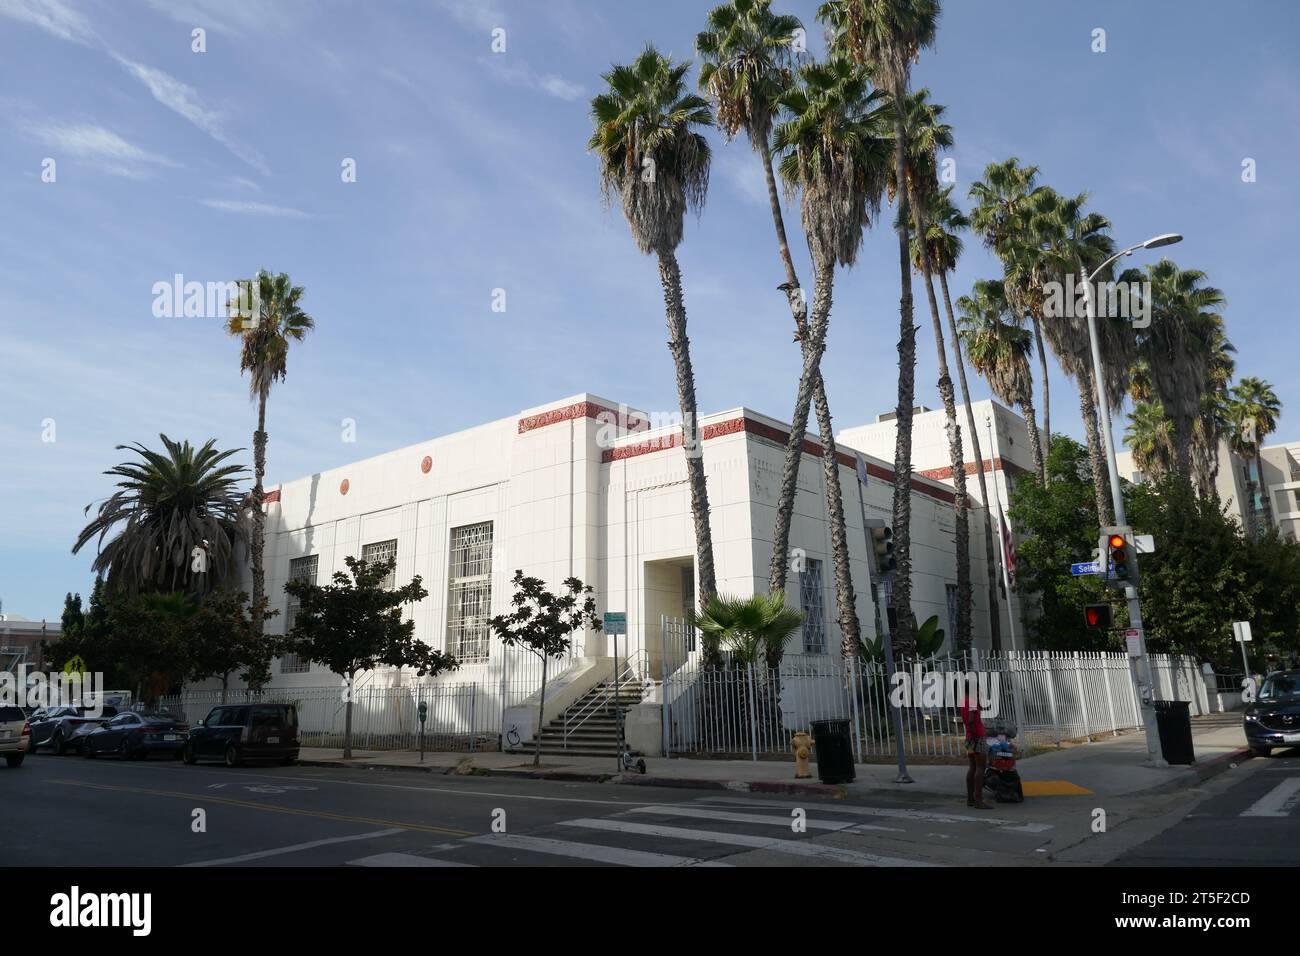 Los Angeles, California, USA 4th November 2023 A general view of atmosphere of US Post Office in Hollywood where cinematographer King David Gray, Lon Chaney Collaborator was killed in an unsolved murder here at 1615 Wilcox Avenue on November 4, 2023in Los Angeles, California, USA. Photo by Barry King/Alamy Stock Photo Stock Photo